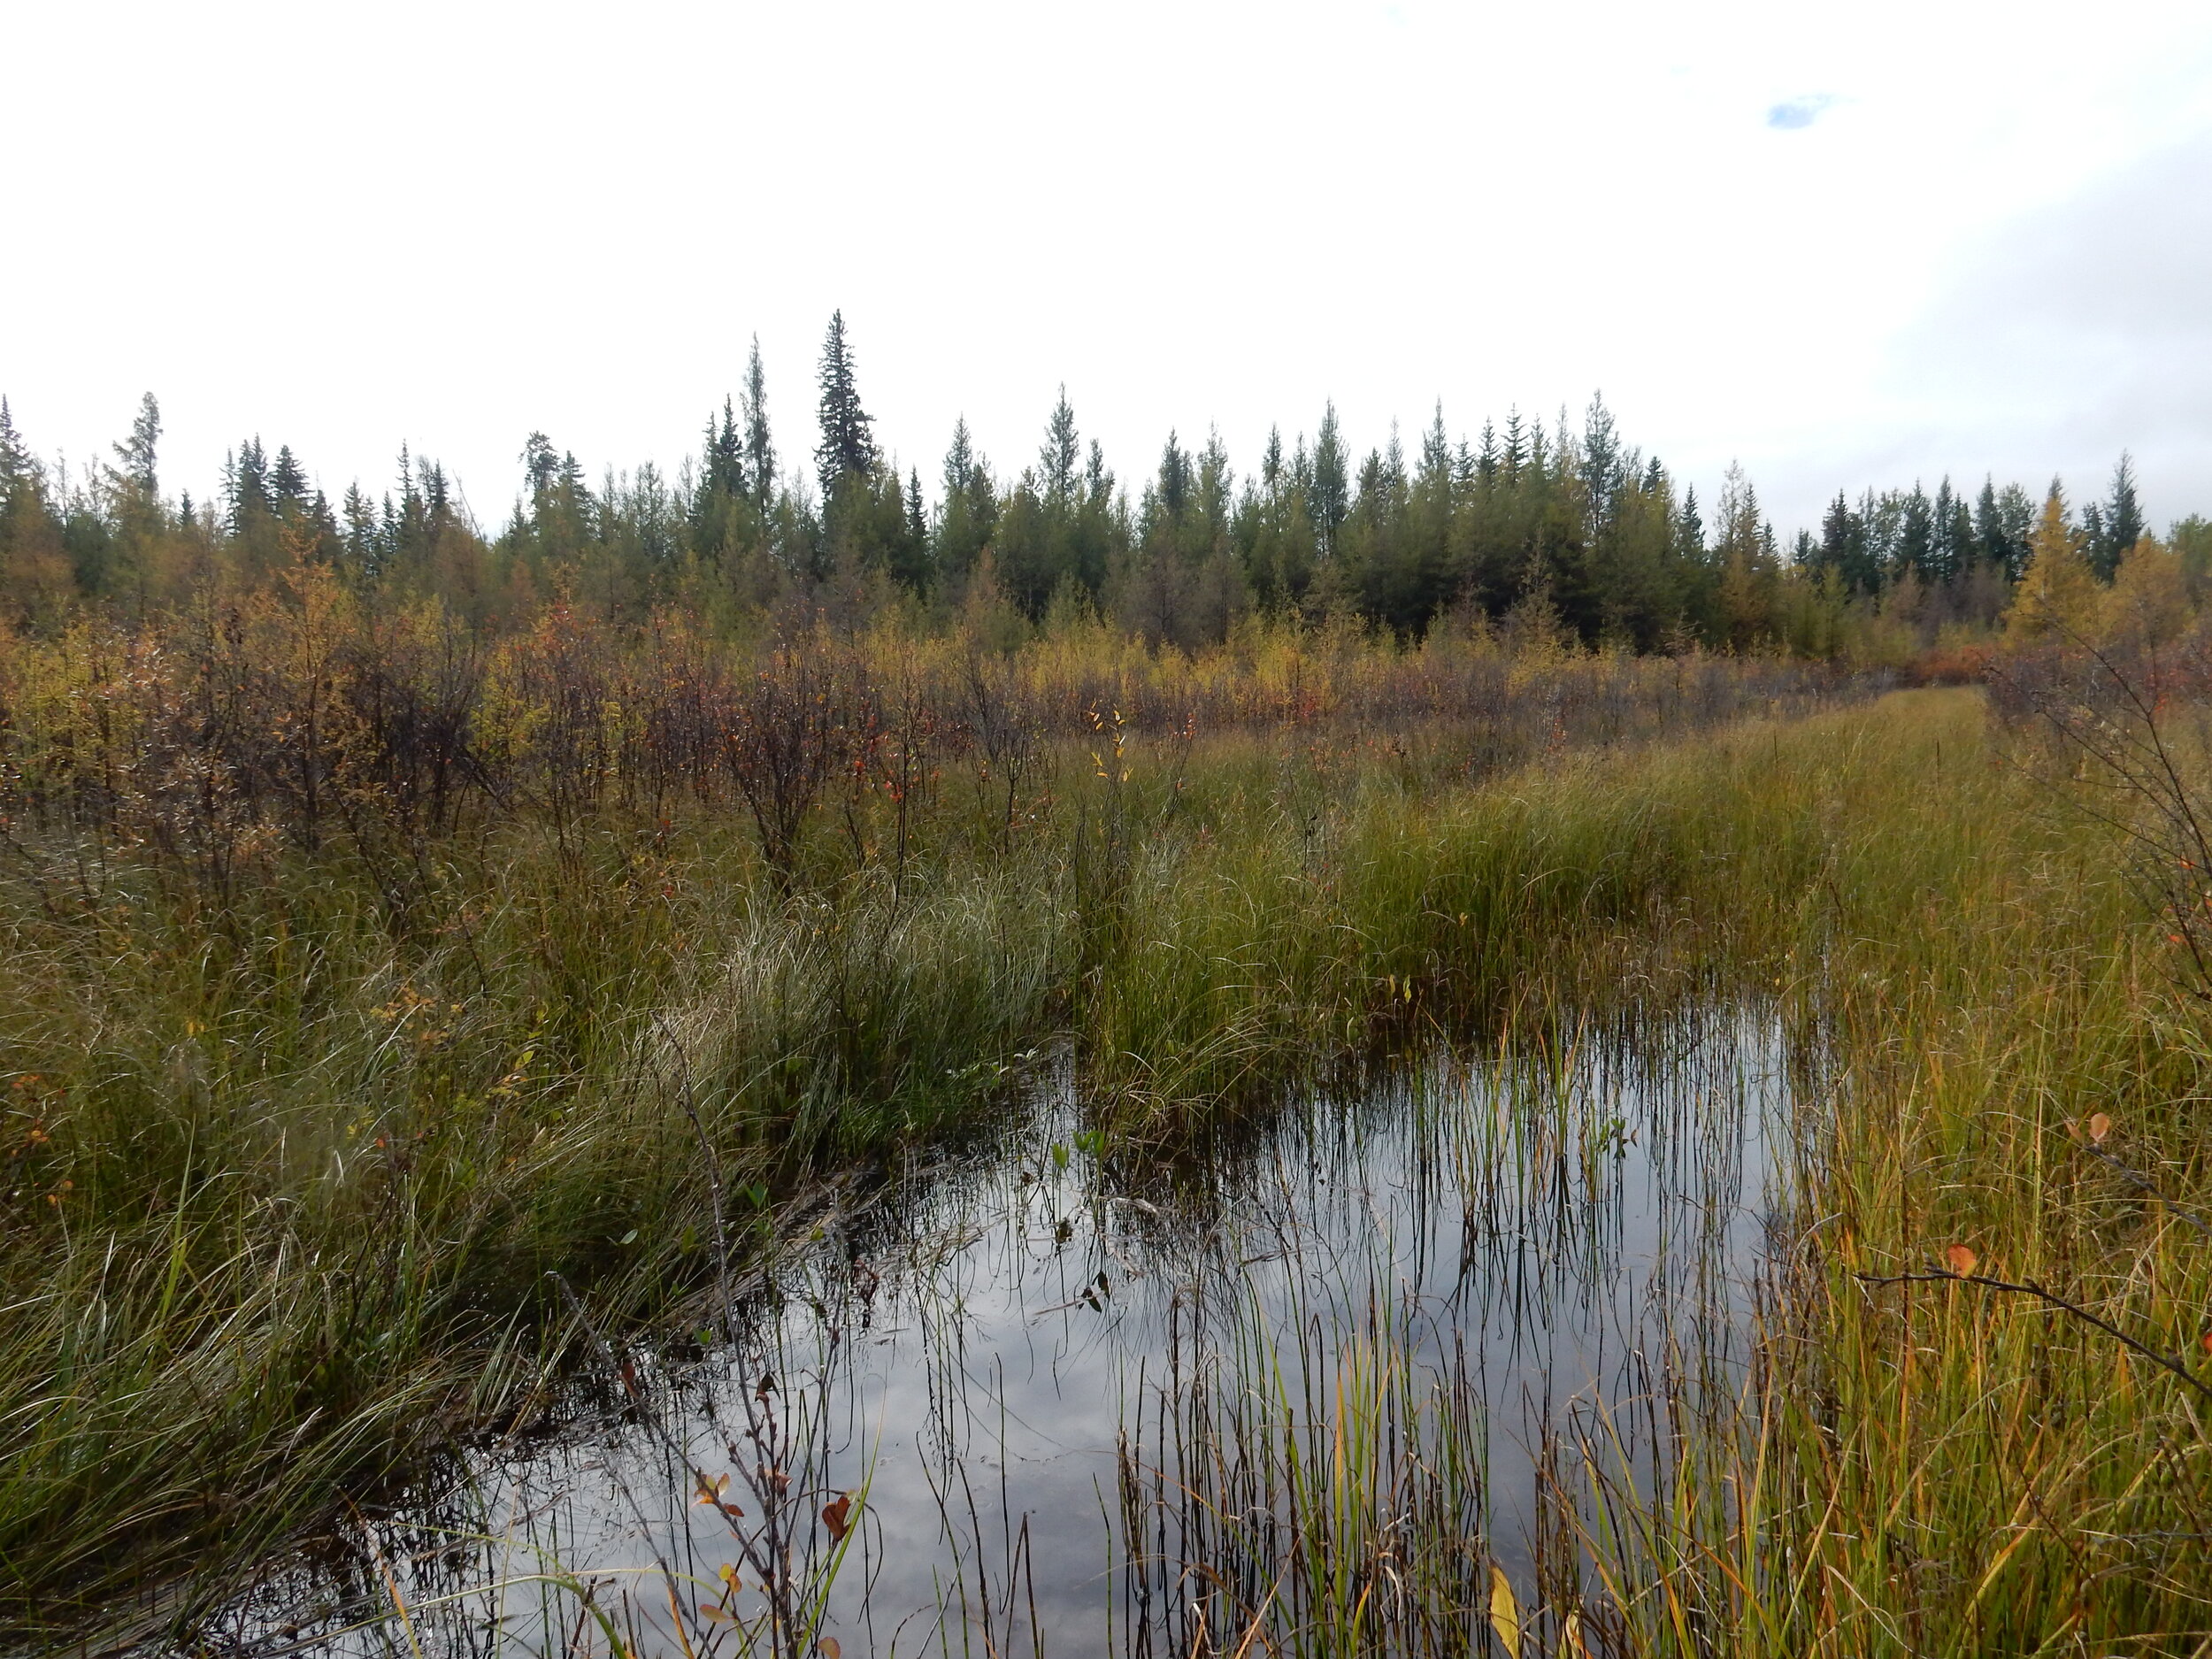  Extremely wet graminoid fen (foreground), seen in behind is the transition to a shrubby fen, tamarack swamp, and upland ridge. 